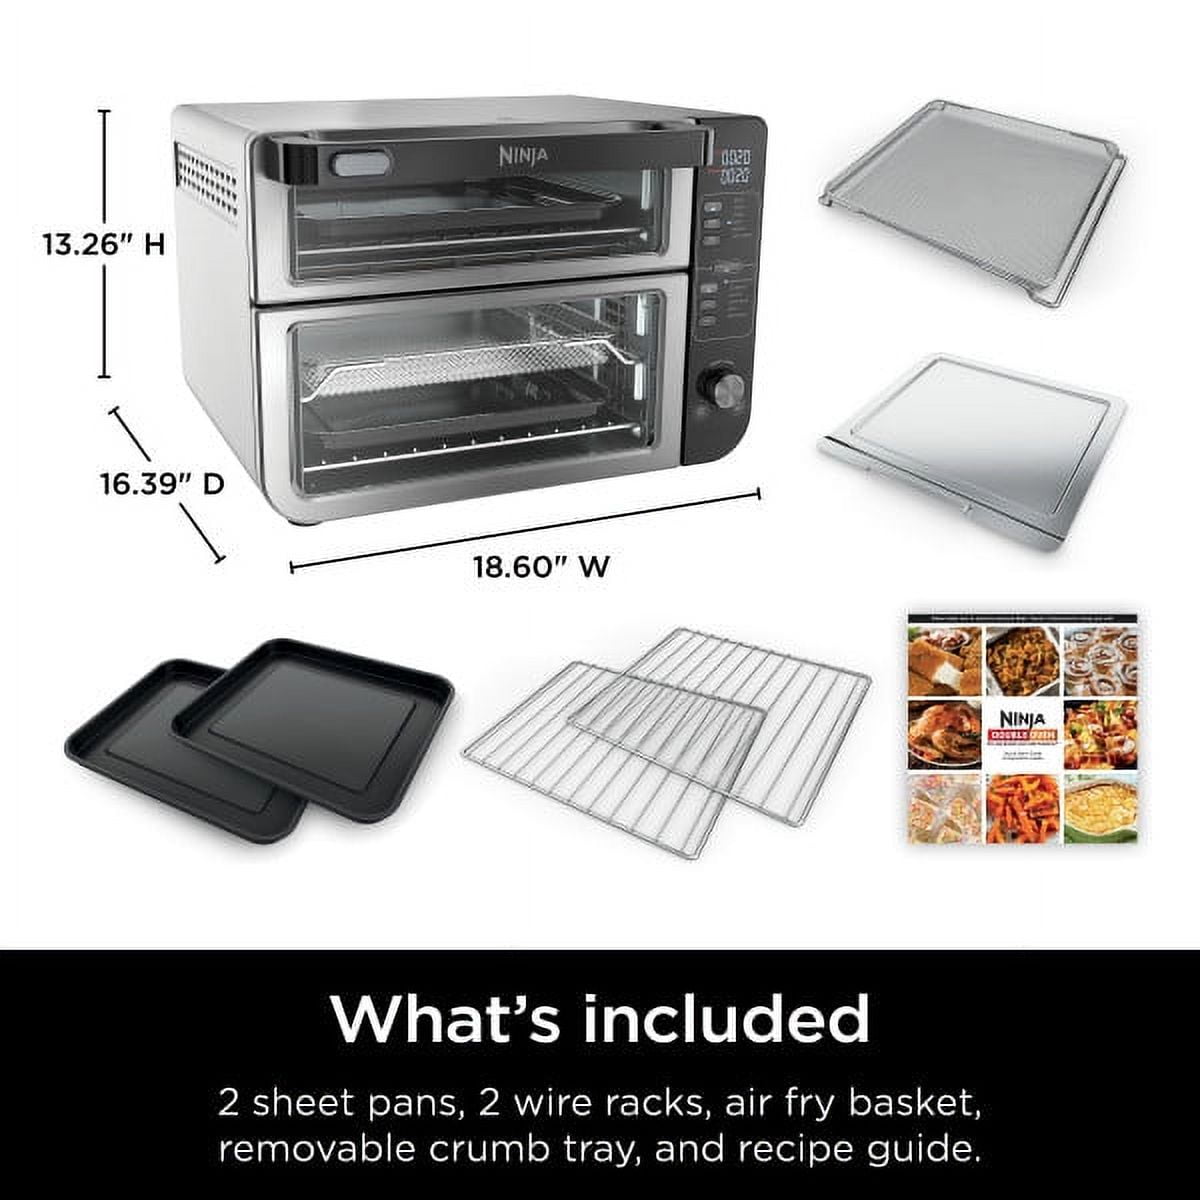 Ninja DCT401 12-in-1 Double Oven with FlexDoor, FlavorSeal & Smart Finish,  Rapid Top Convection and Air Fry Bottom , Bake, Roast, Toast, Air Fry,  Pizza and More… in 2023